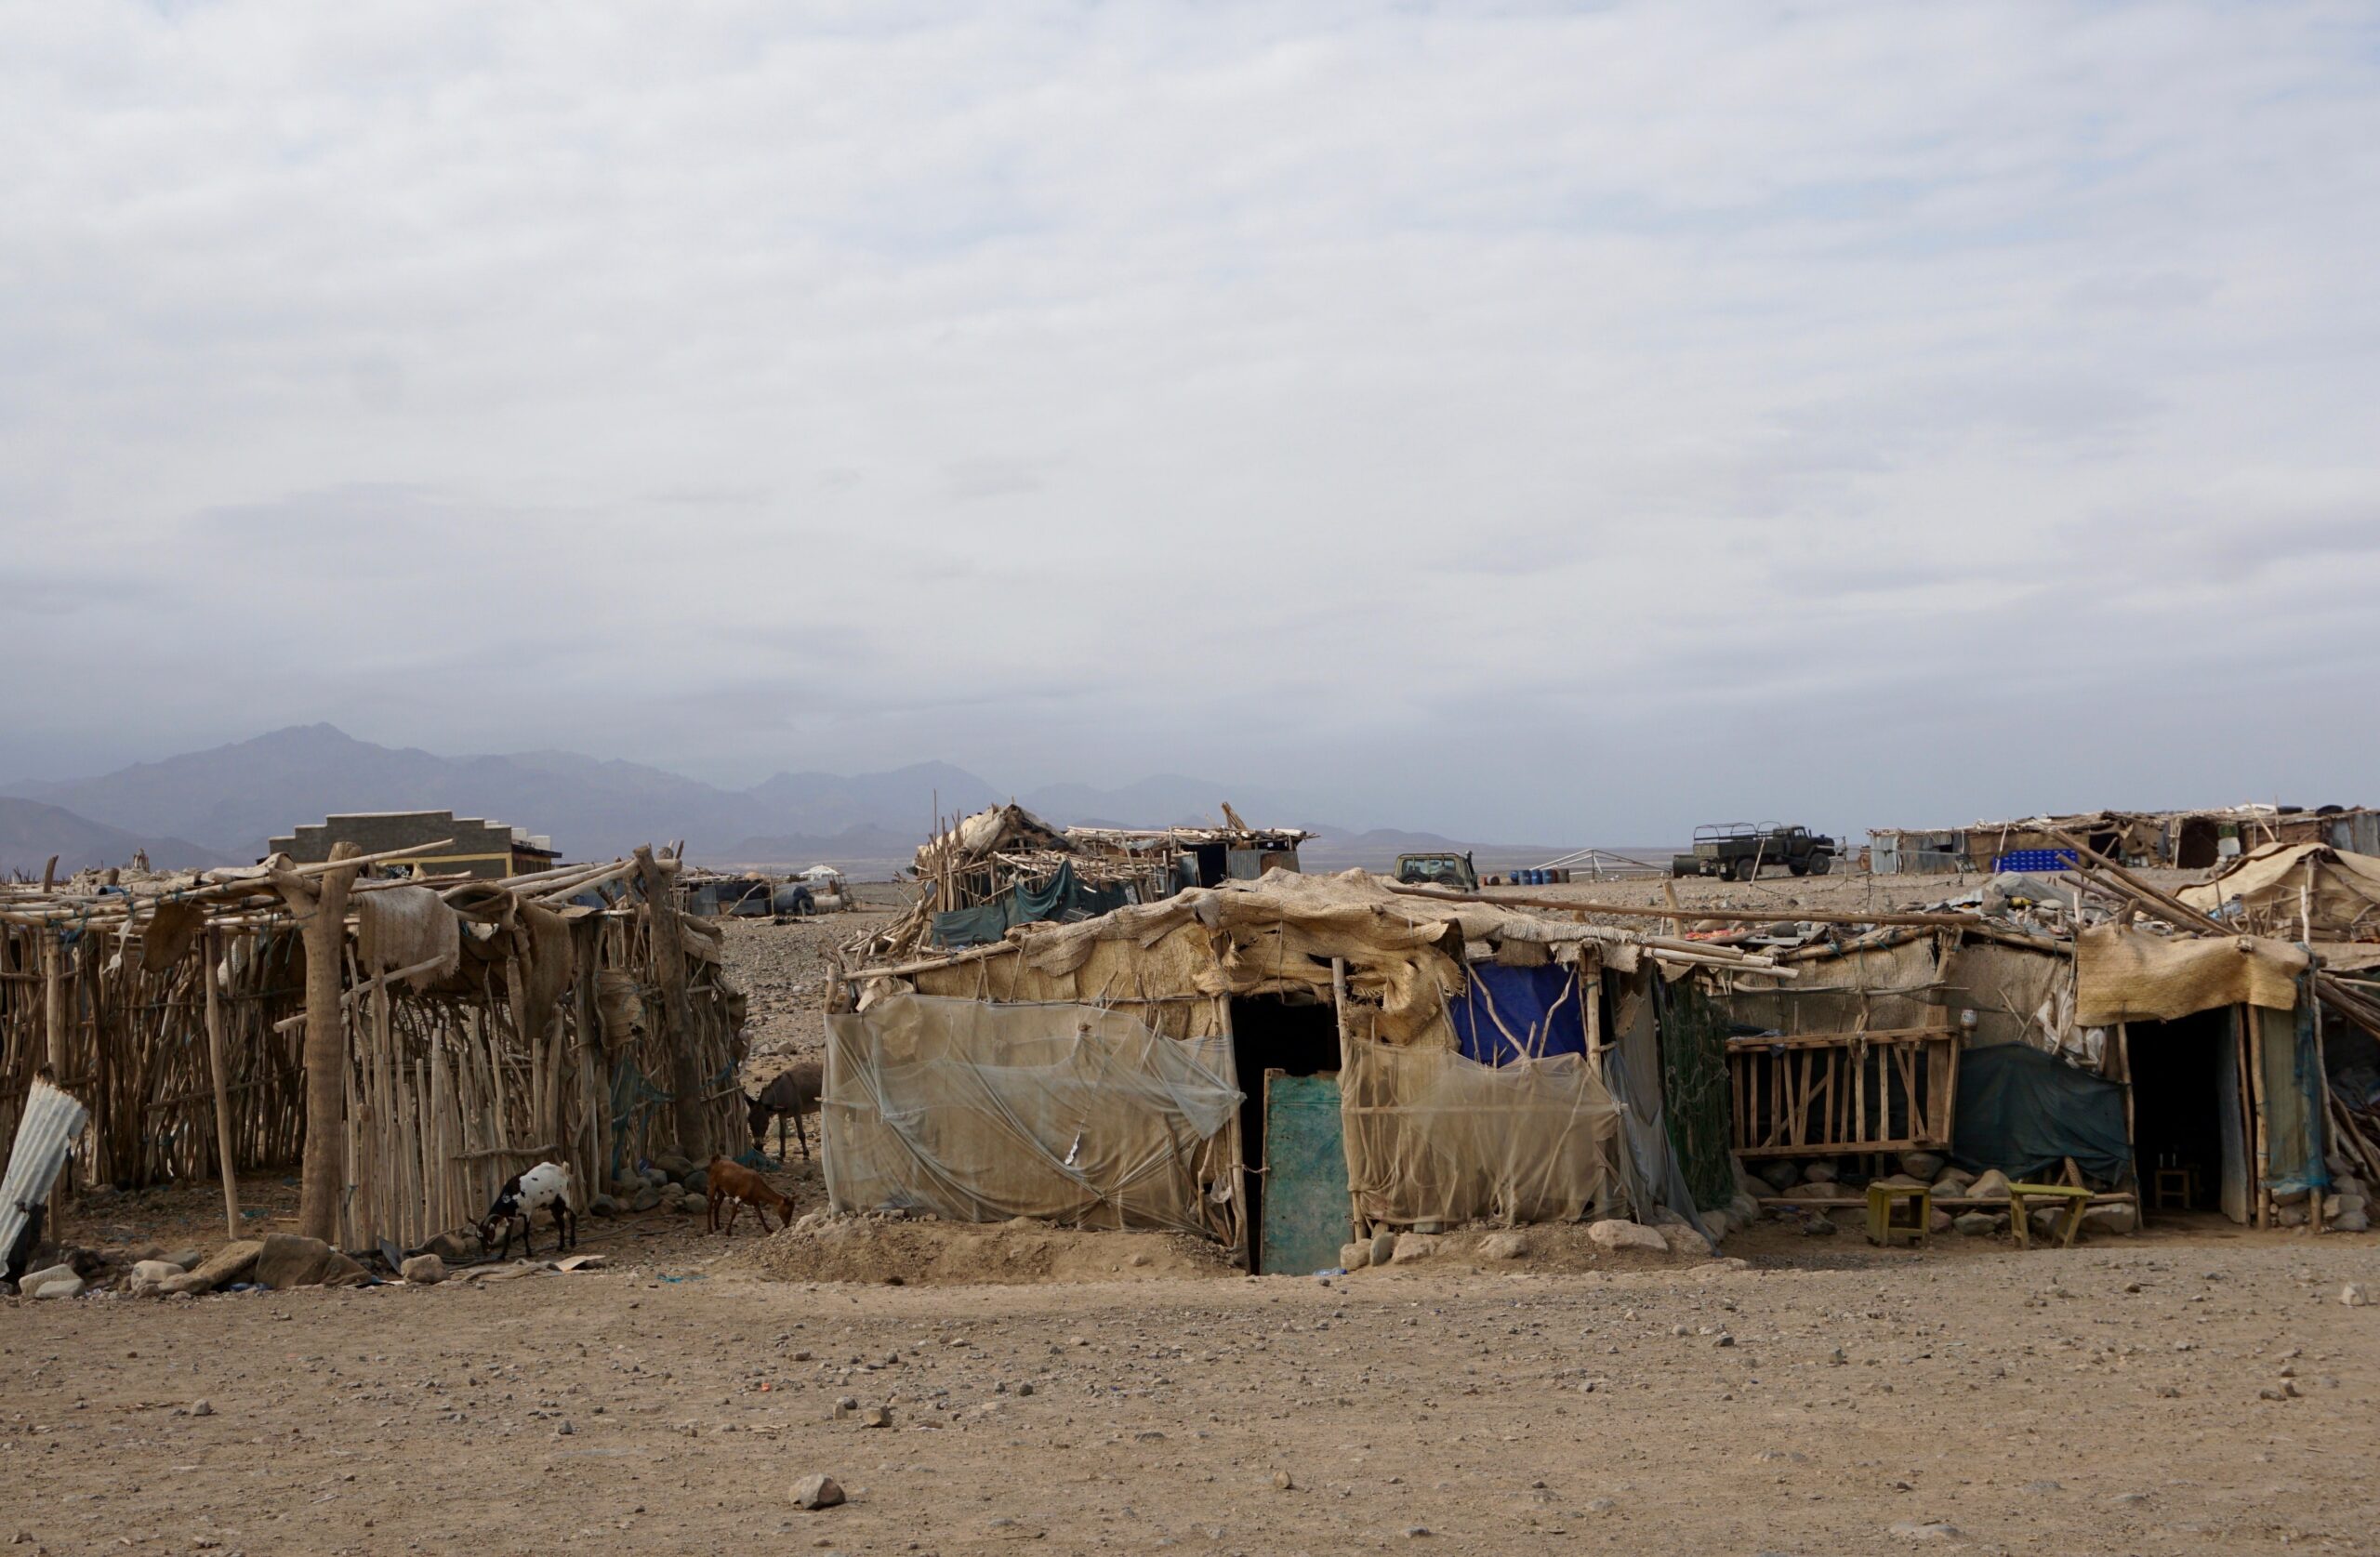 Huts in Ethiopia's Afar region, which provide shelter for many of the region's displaced, amid two years of brutal civil war